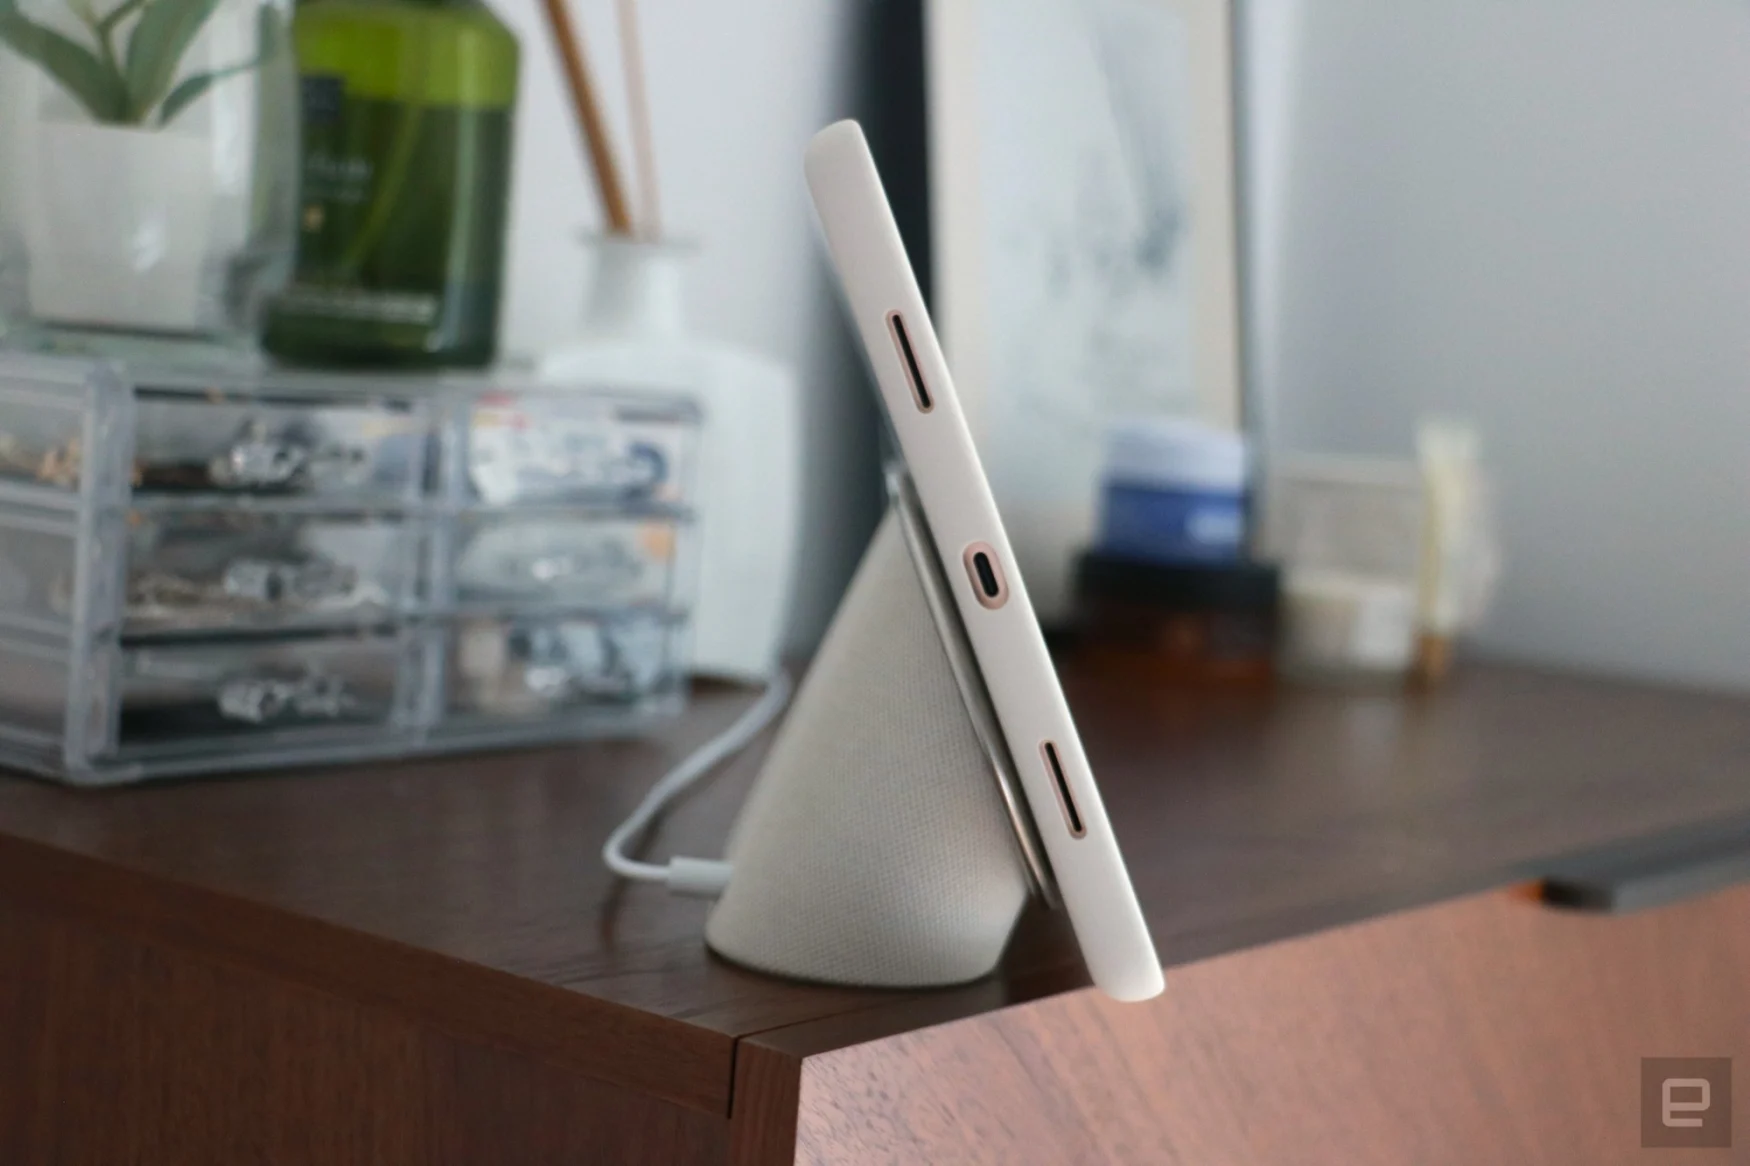 Side view of the Pixel tablet on a walnut cabinet, showing the USB-C port on its left edge.  It is fixed to the base of the speaker with the protective case.